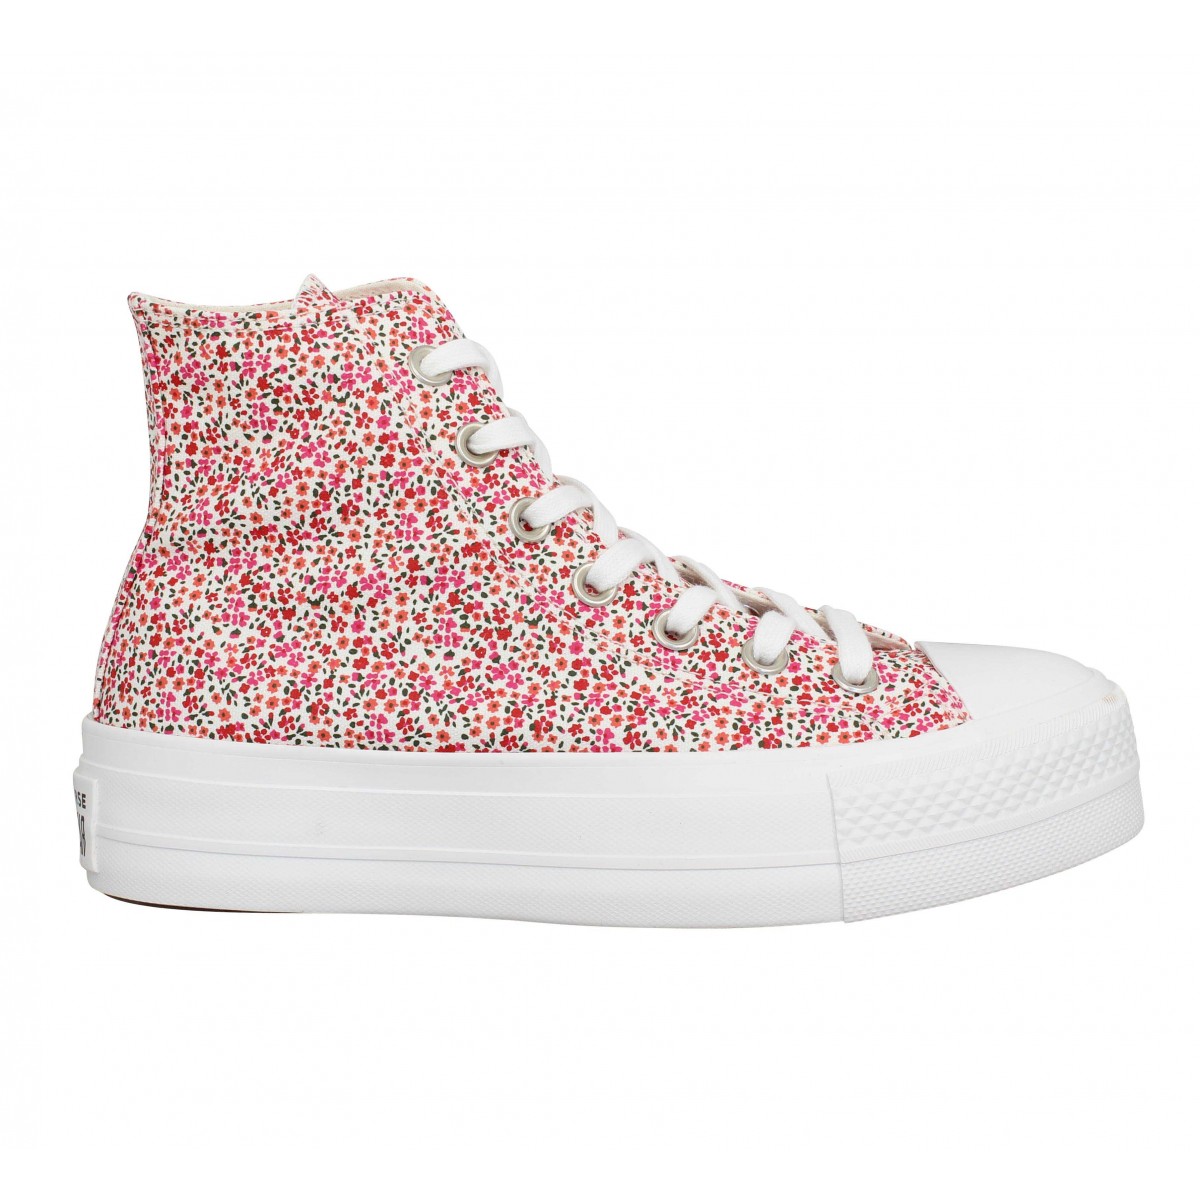 CONVERSE Chuck Taylor All Star Lift toile vintage Femme Floral